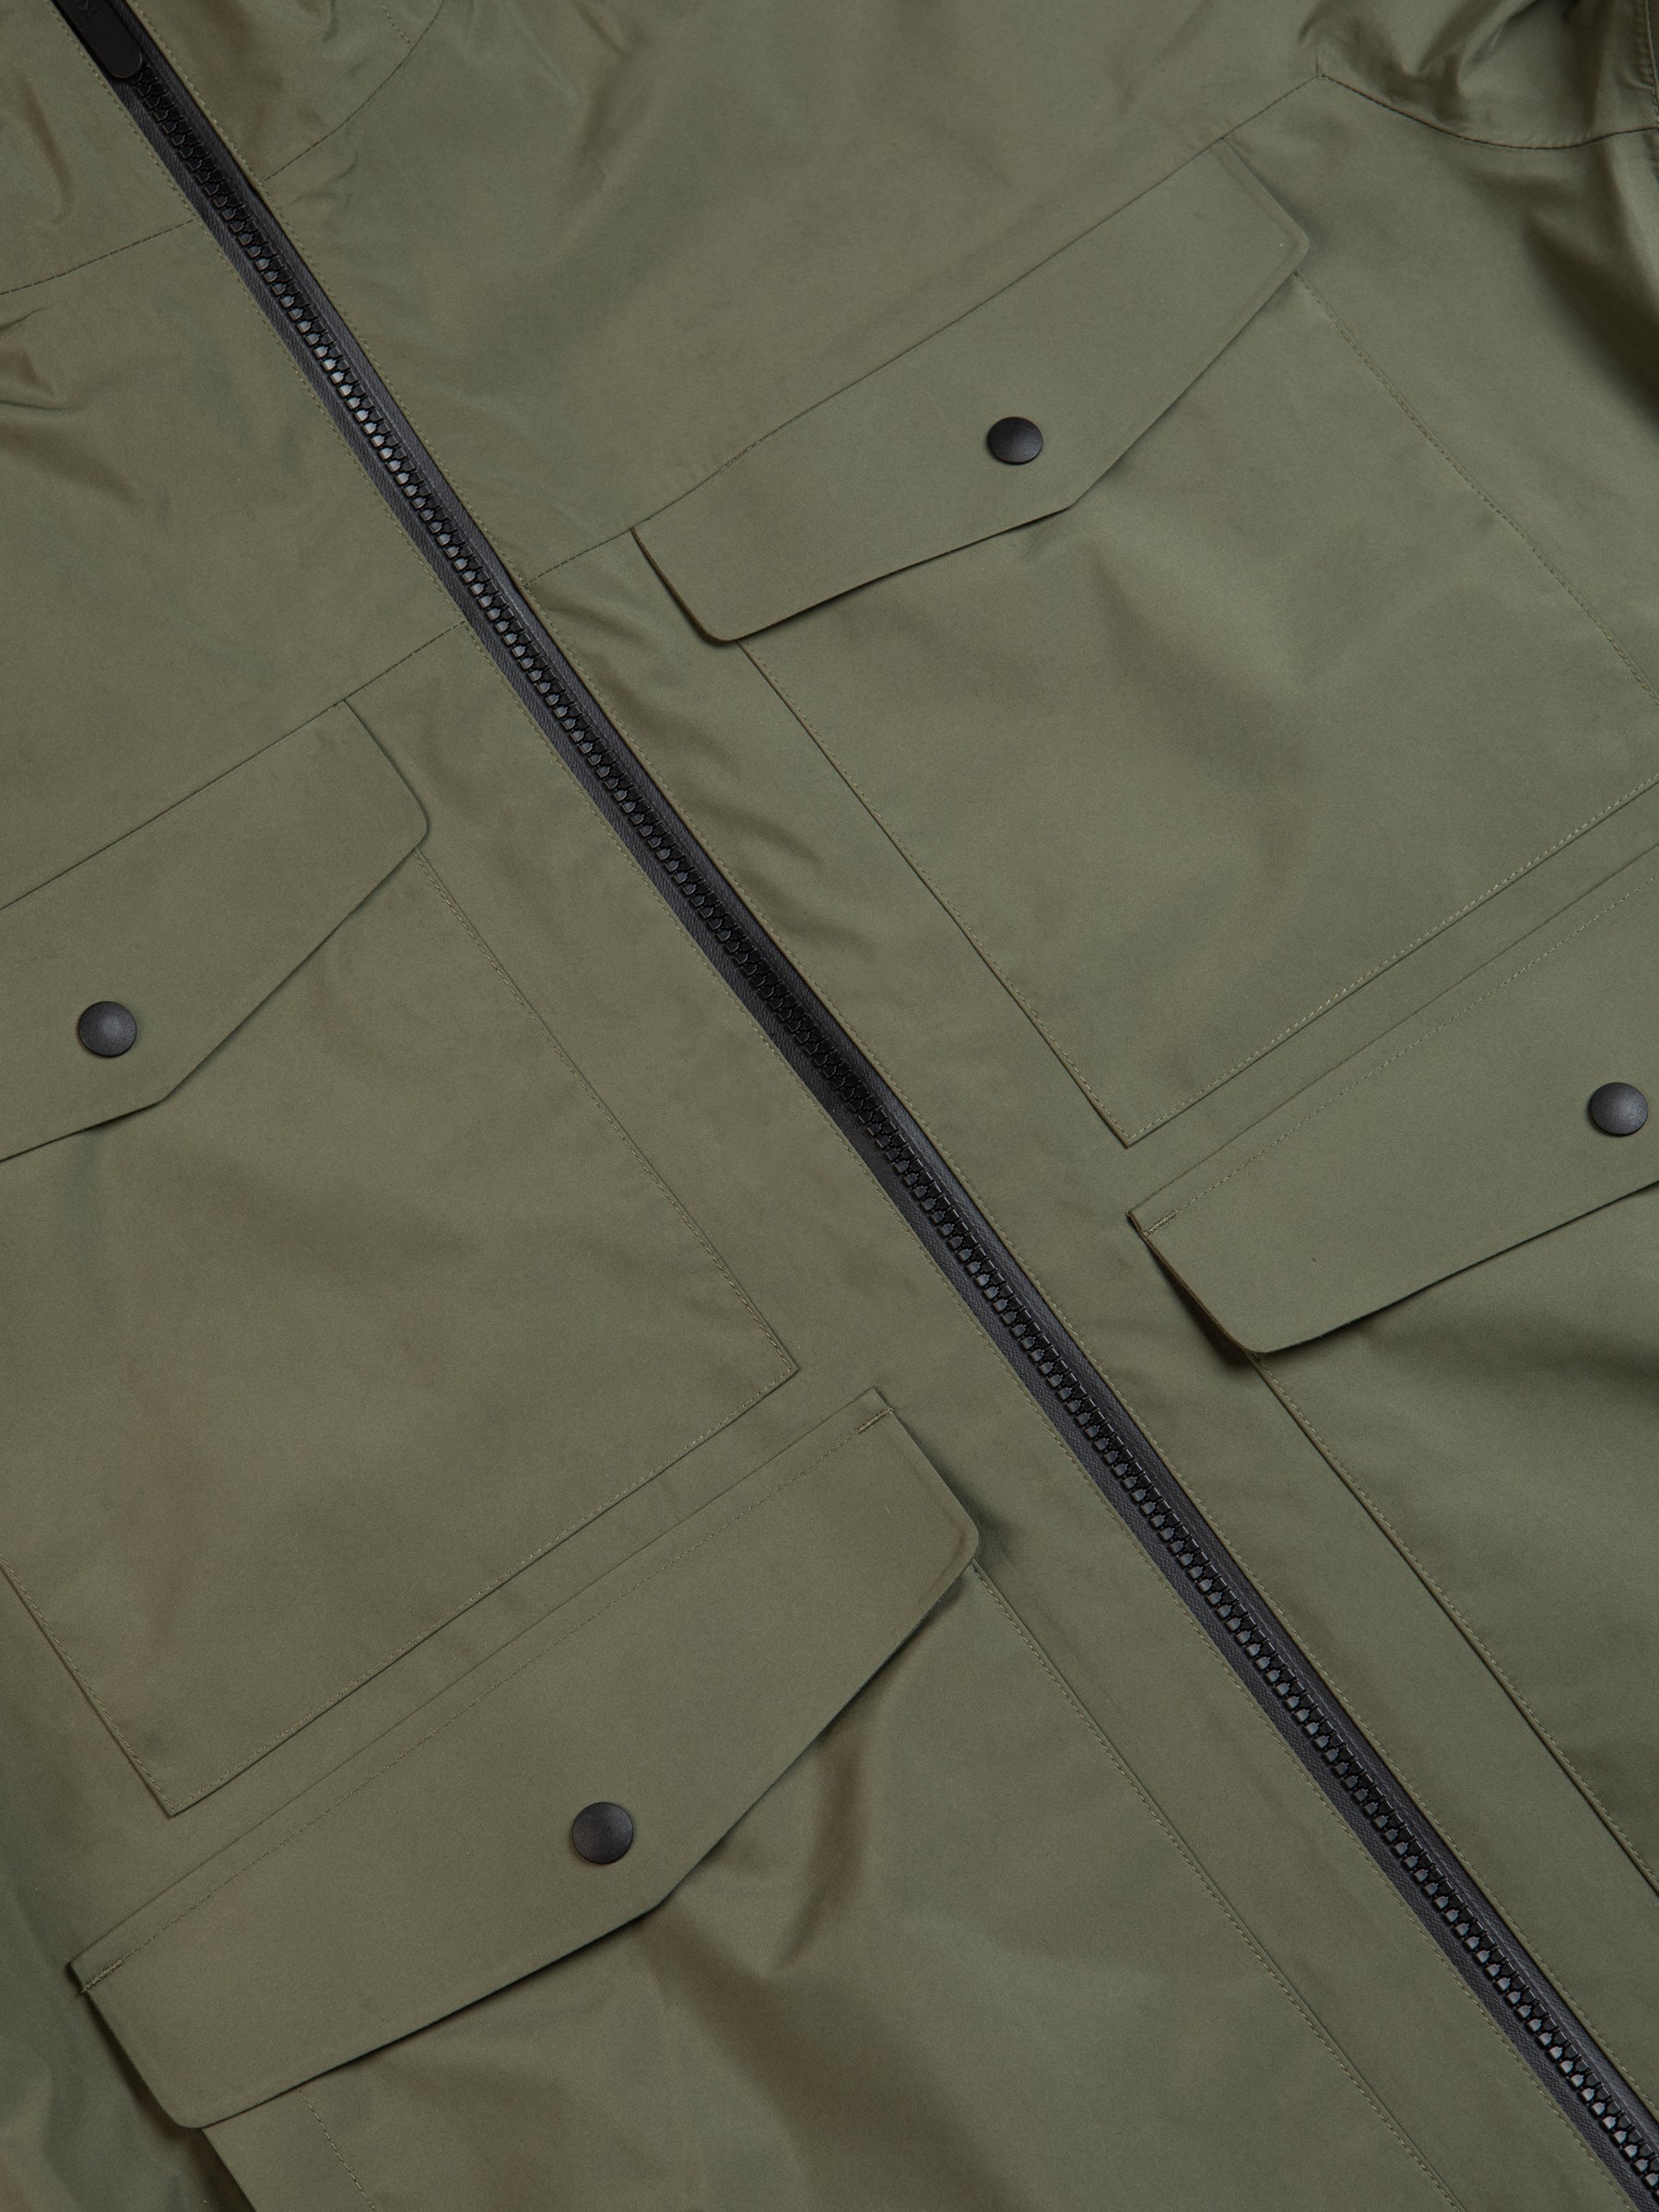 A waterproof jacket with four large patch utility pockets.